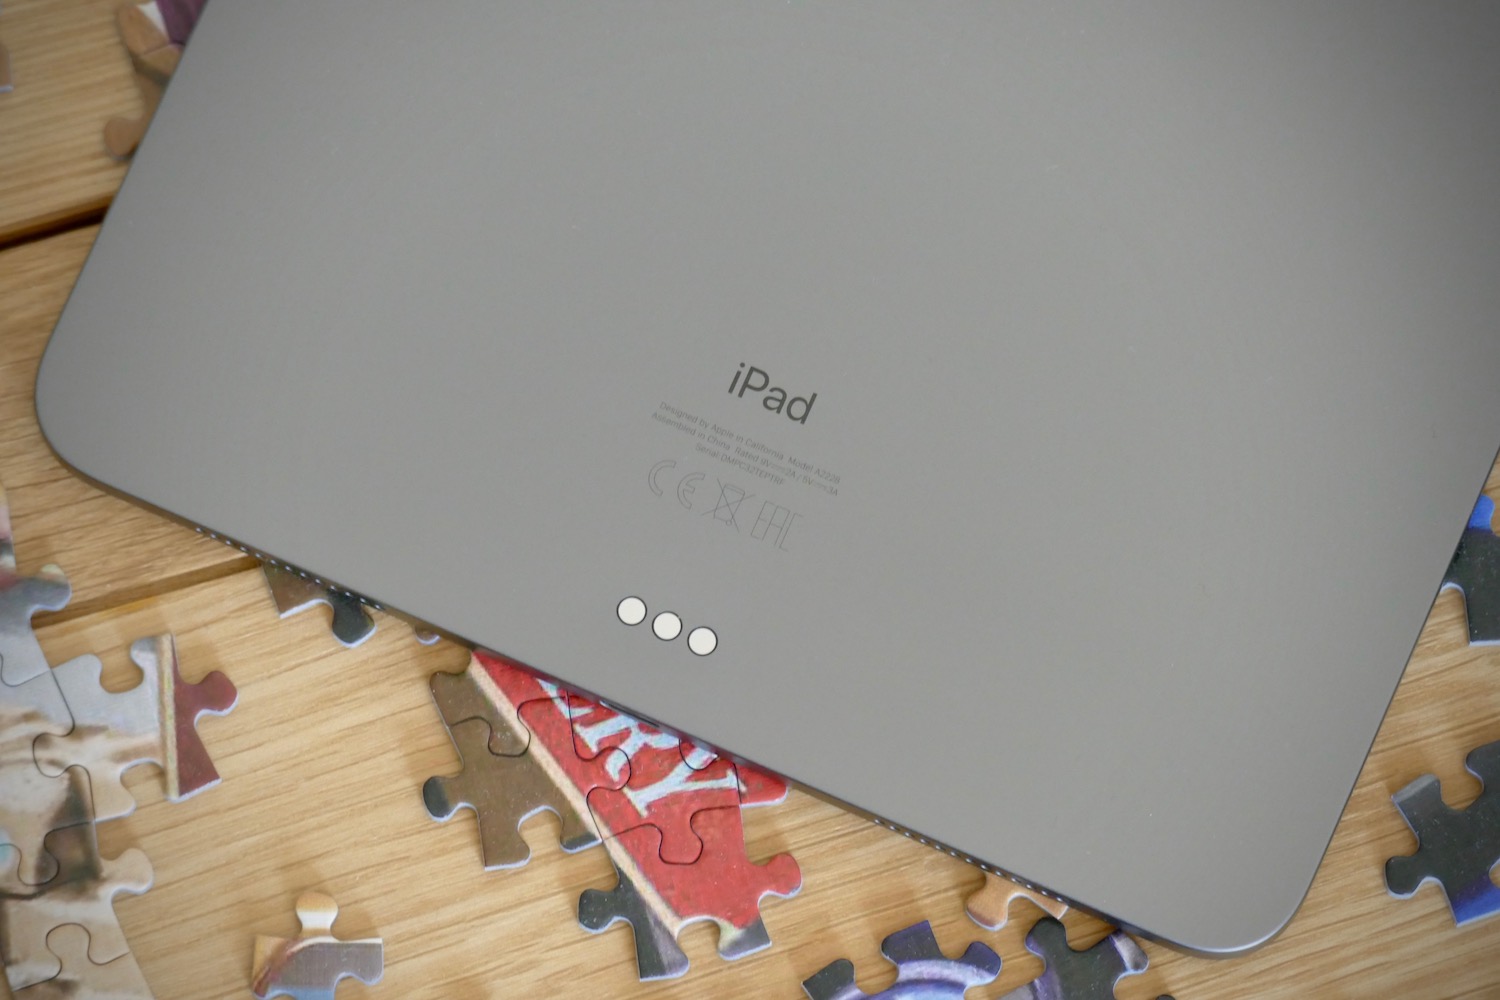 Apple iPad Pro (2020) Review: The Best iPad Yet—Does It Matter?